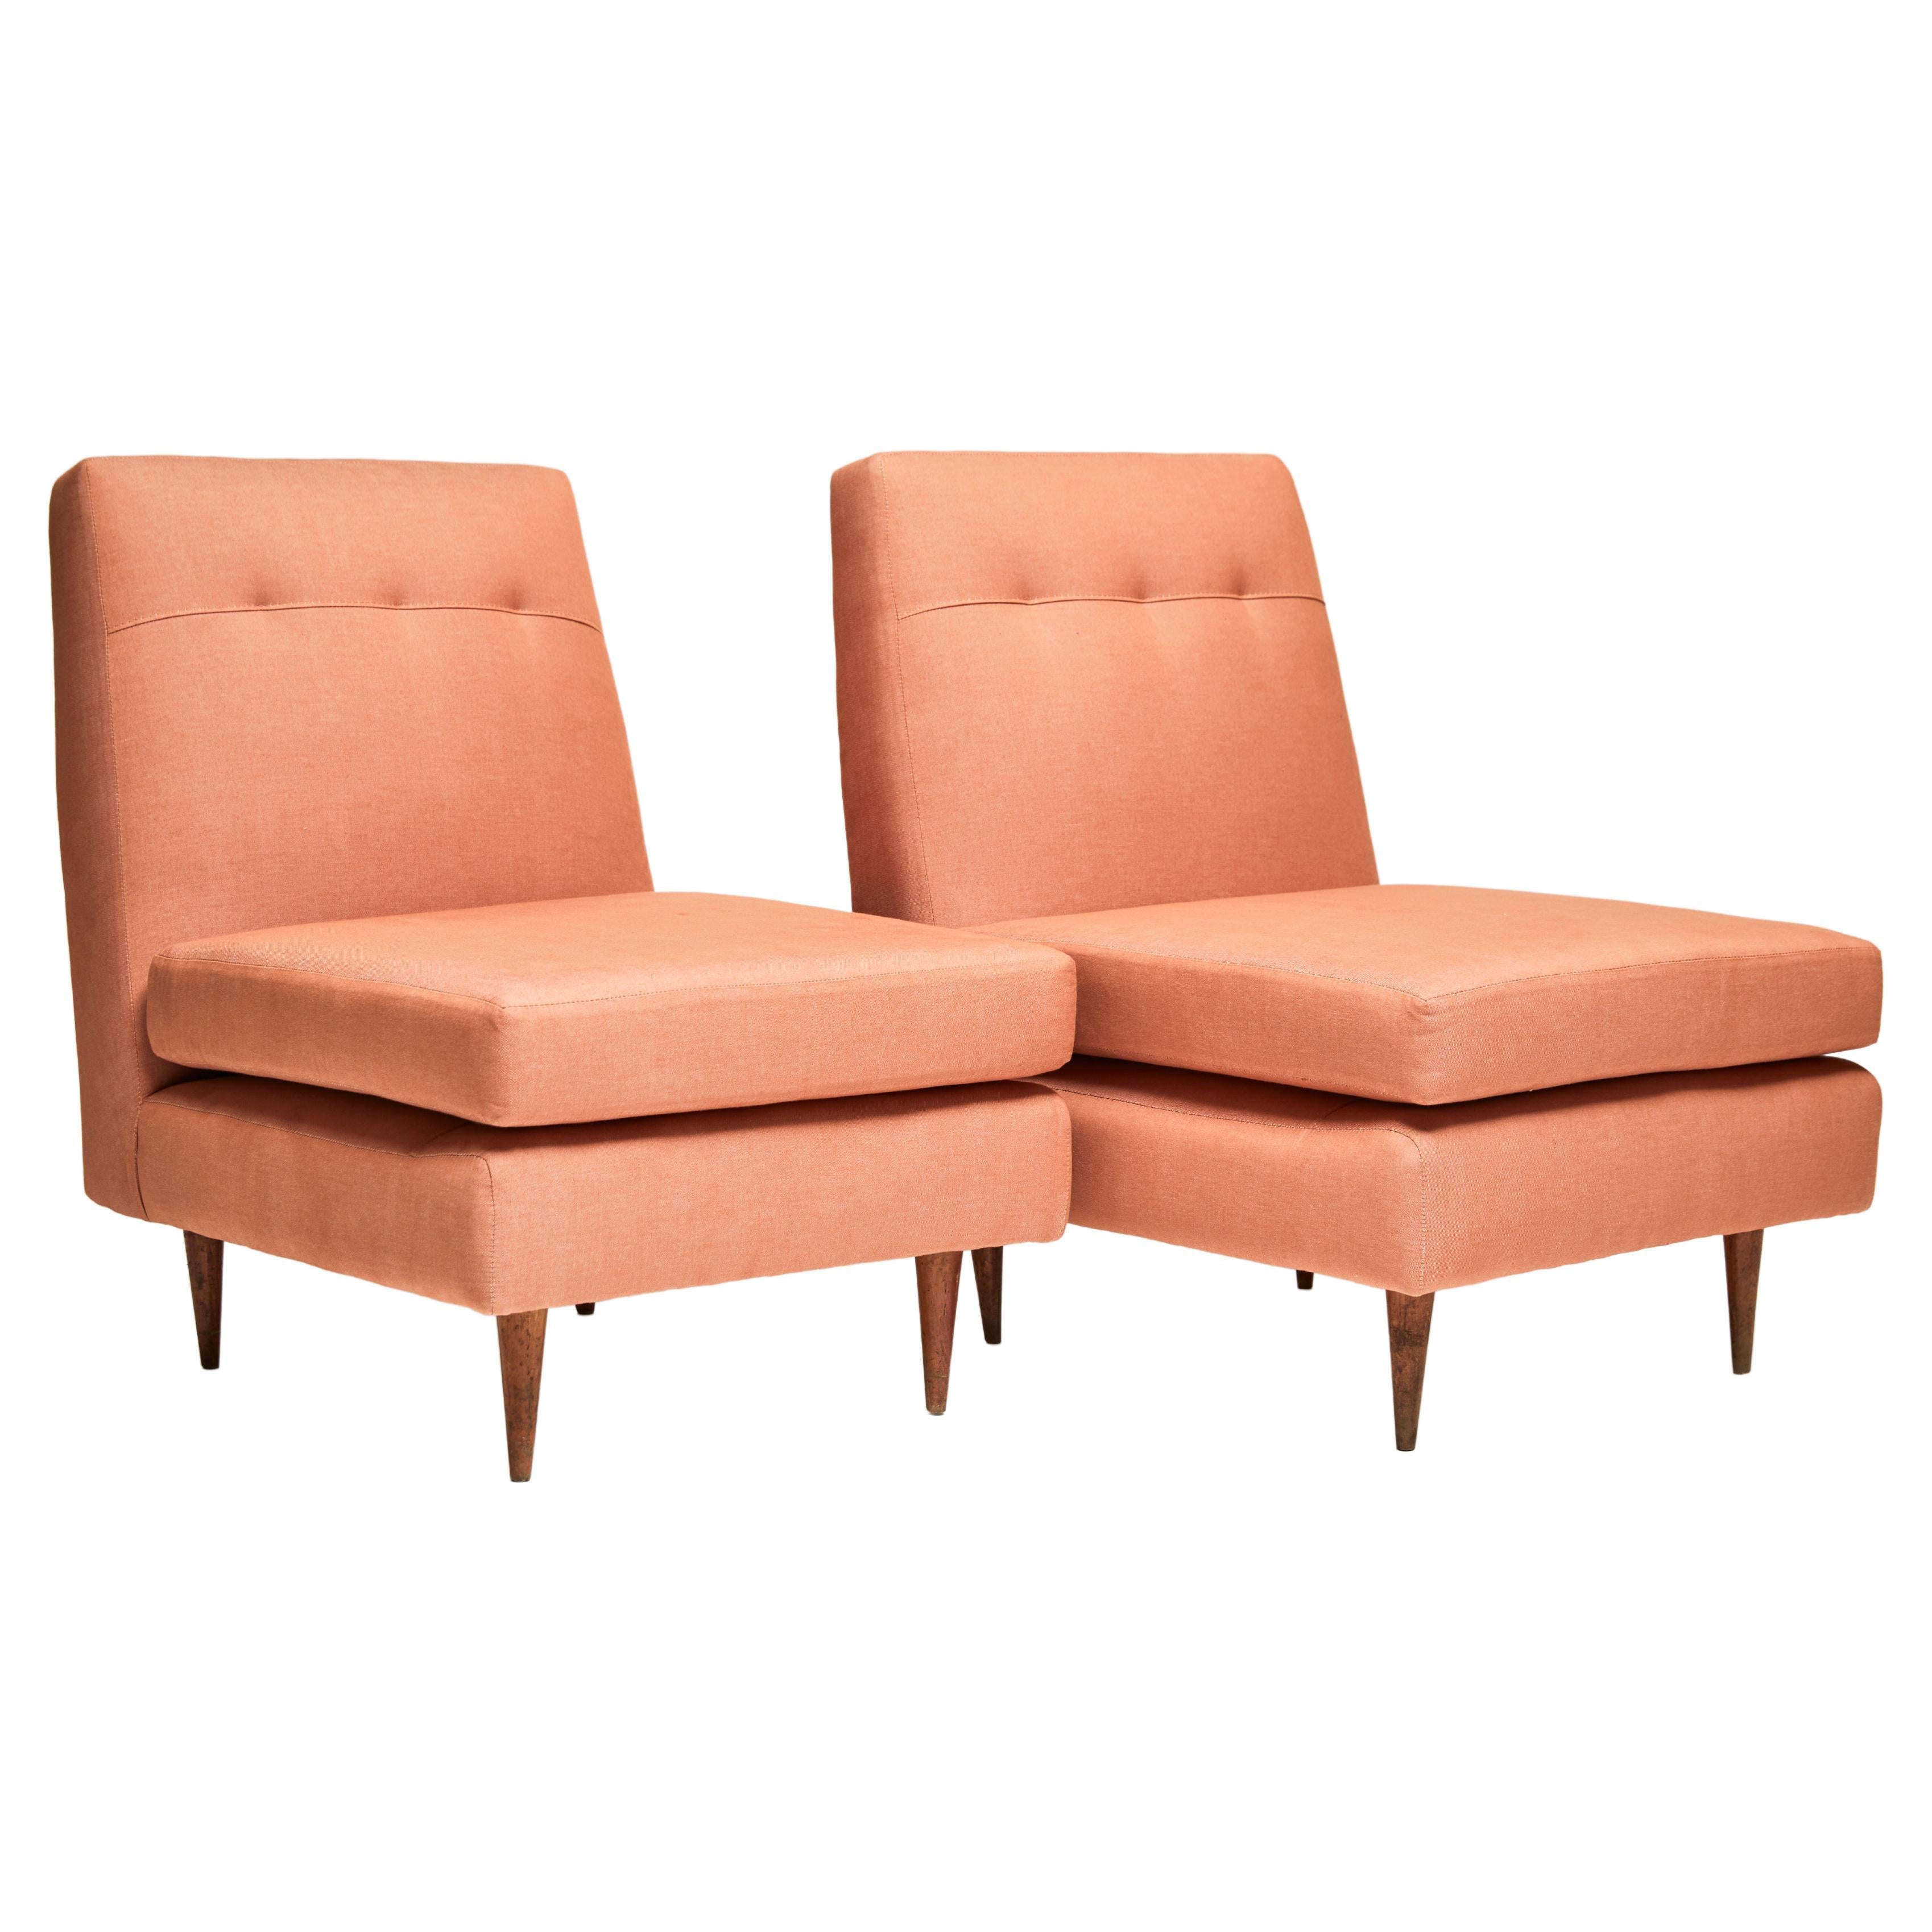 Available now, this Mid-Century Modern armchairs in hardwood & salmon linen by Joaquim Tenreiro are gorgeous!

These elegant low armchairs consist of a hardwood structure with re-upholstered loose cushions in orange linen. Besides the small marks of